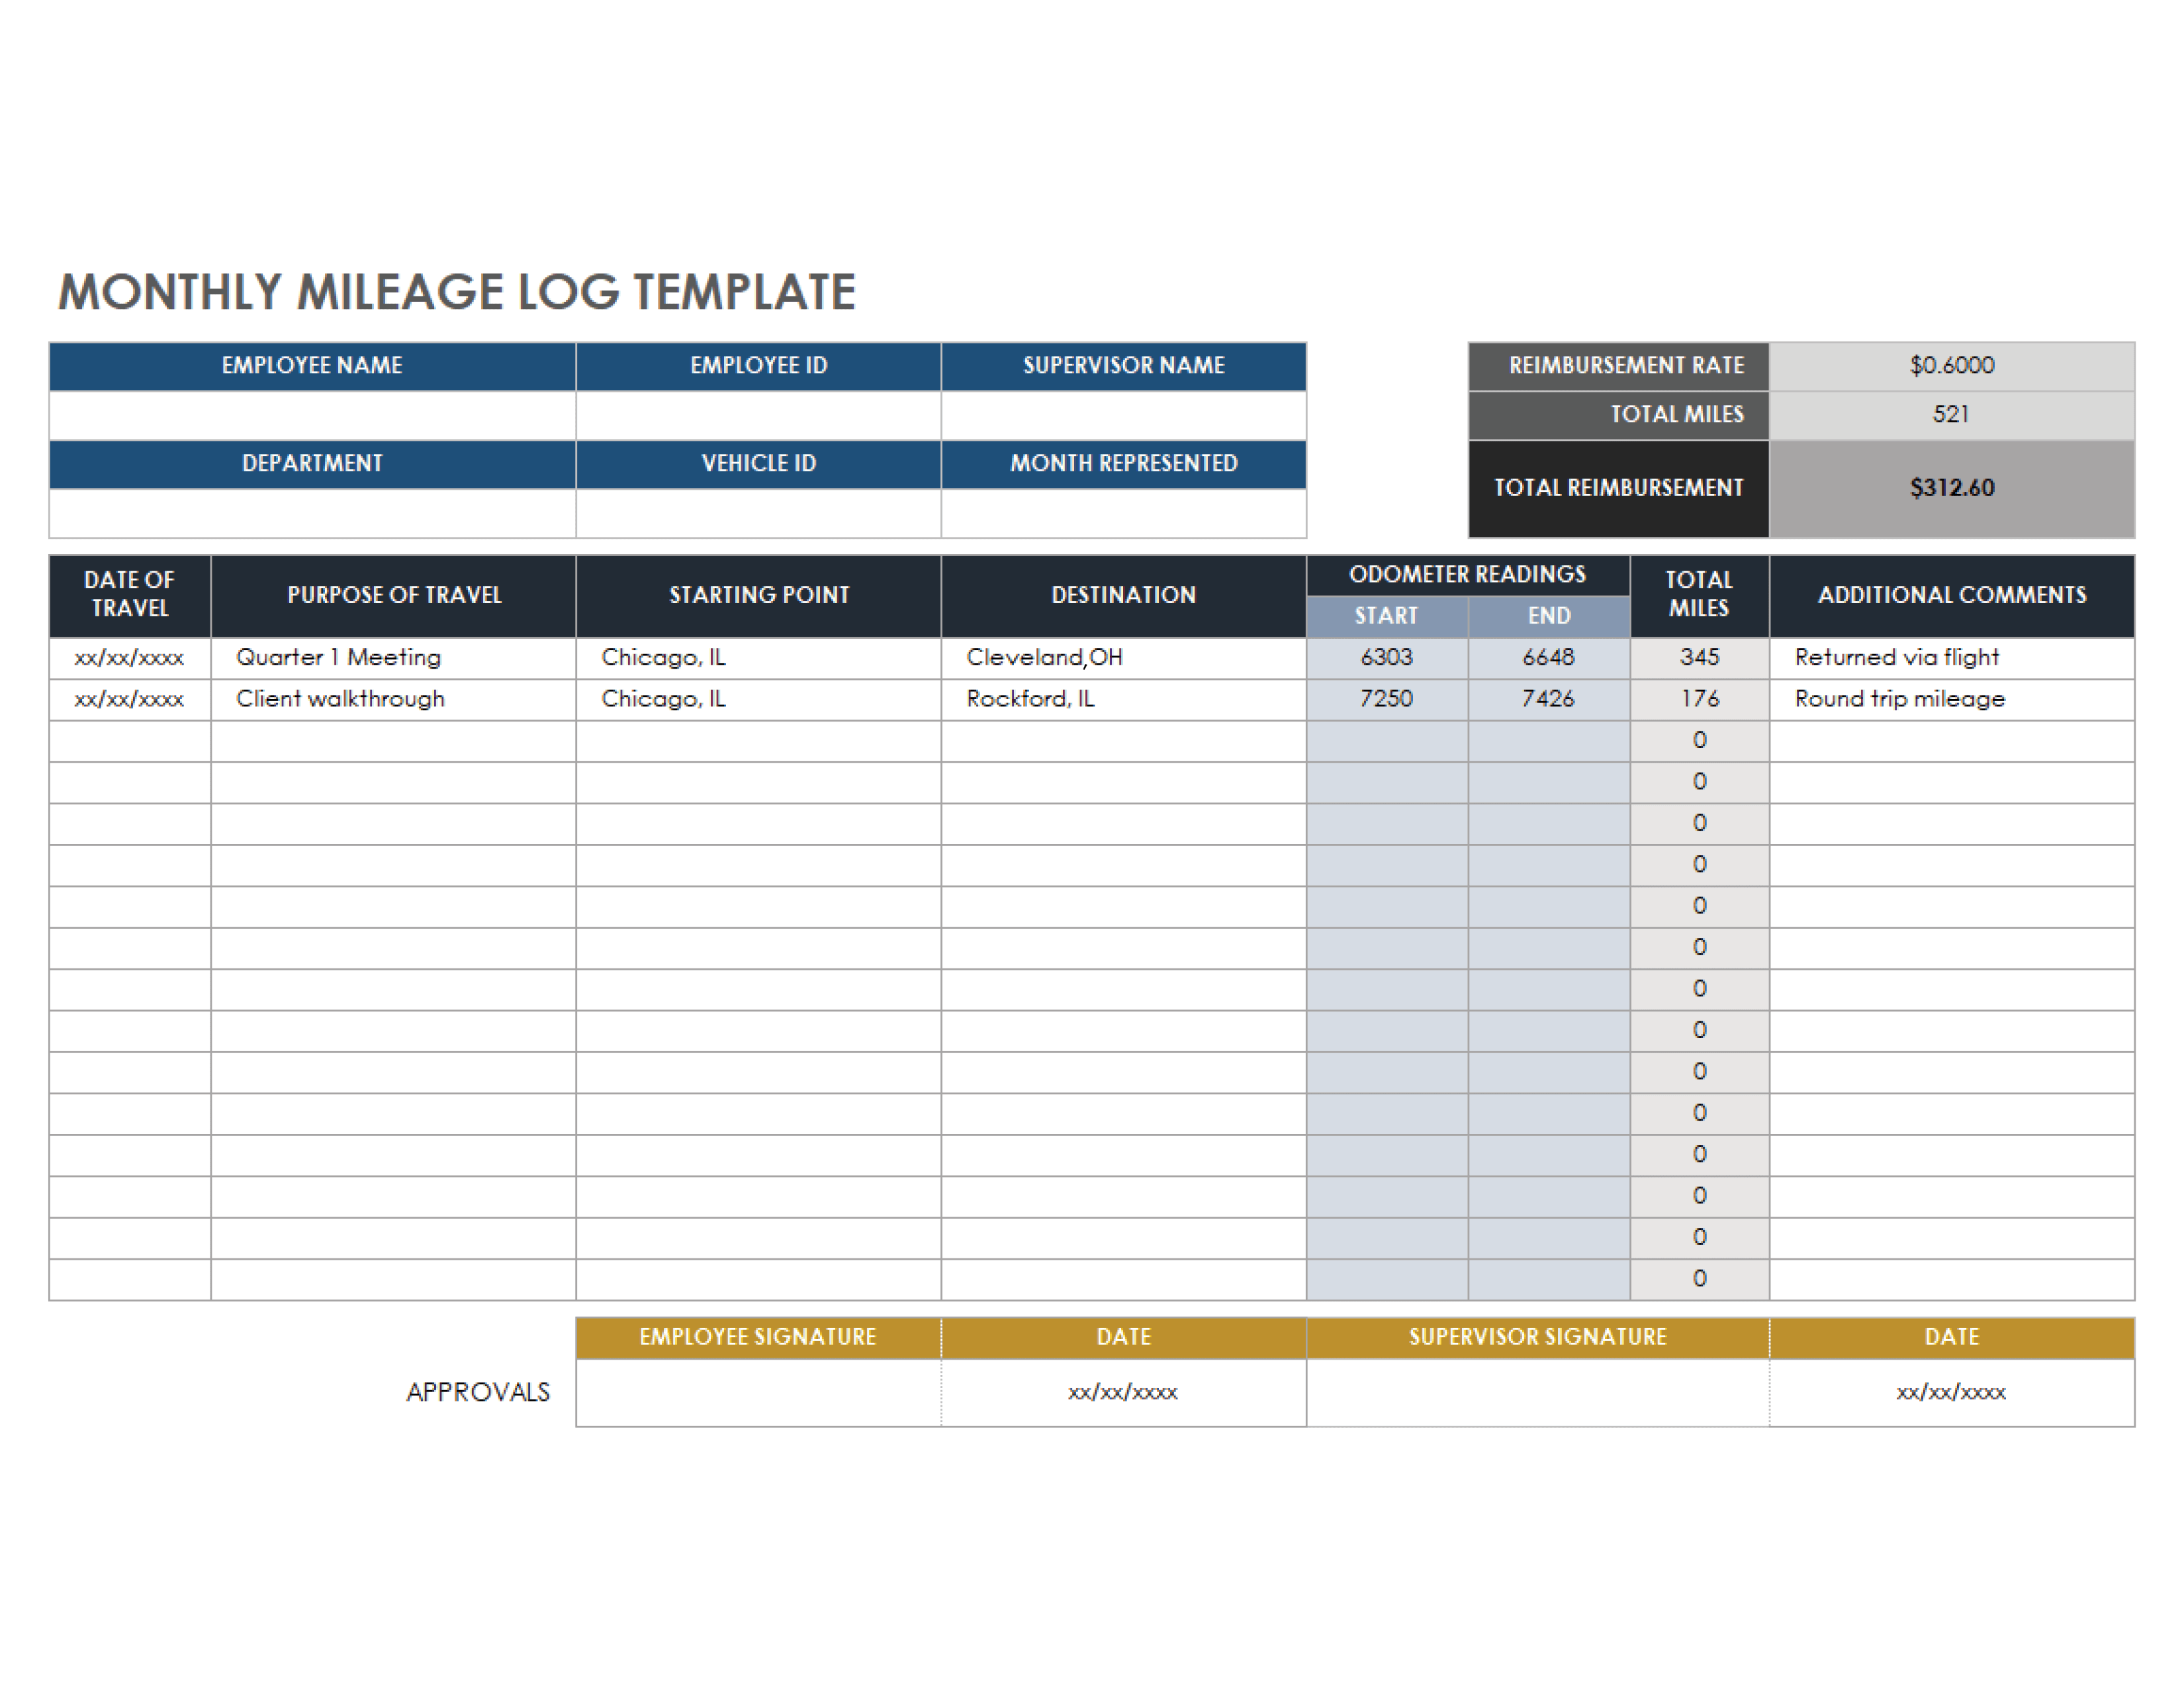 Monthly Mileage Log Template